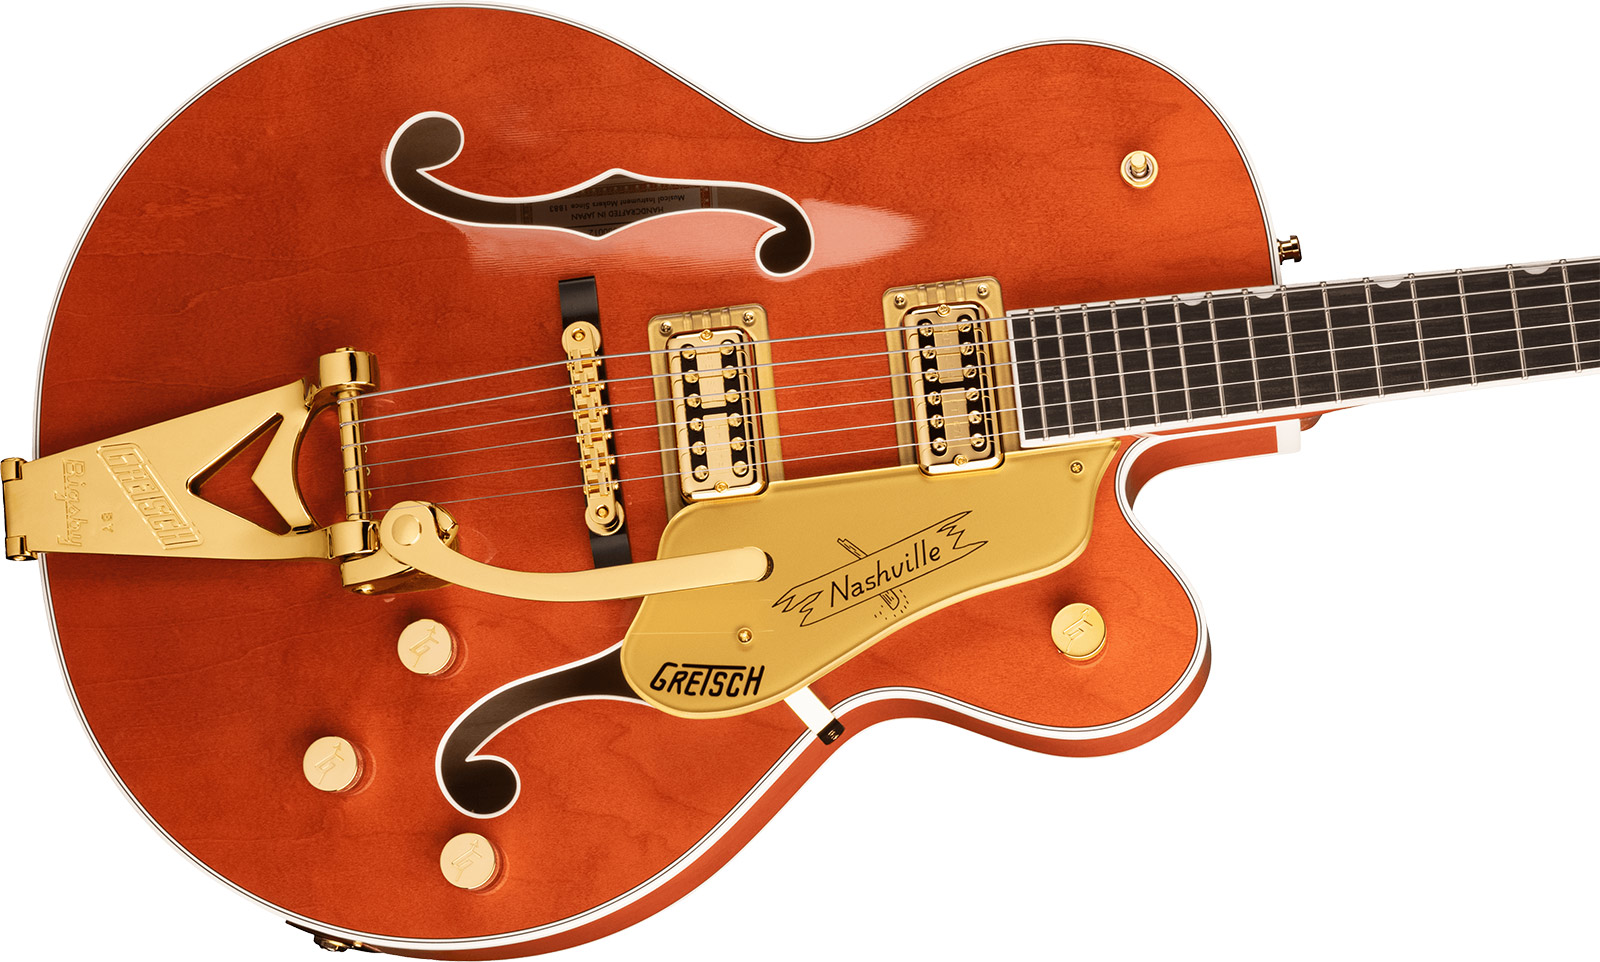 Gretsch G6120tg Players Edition Nashville Pro Jap Bigsby Eb - Orange Stain - Hollow-body electric guitar - Variation 2